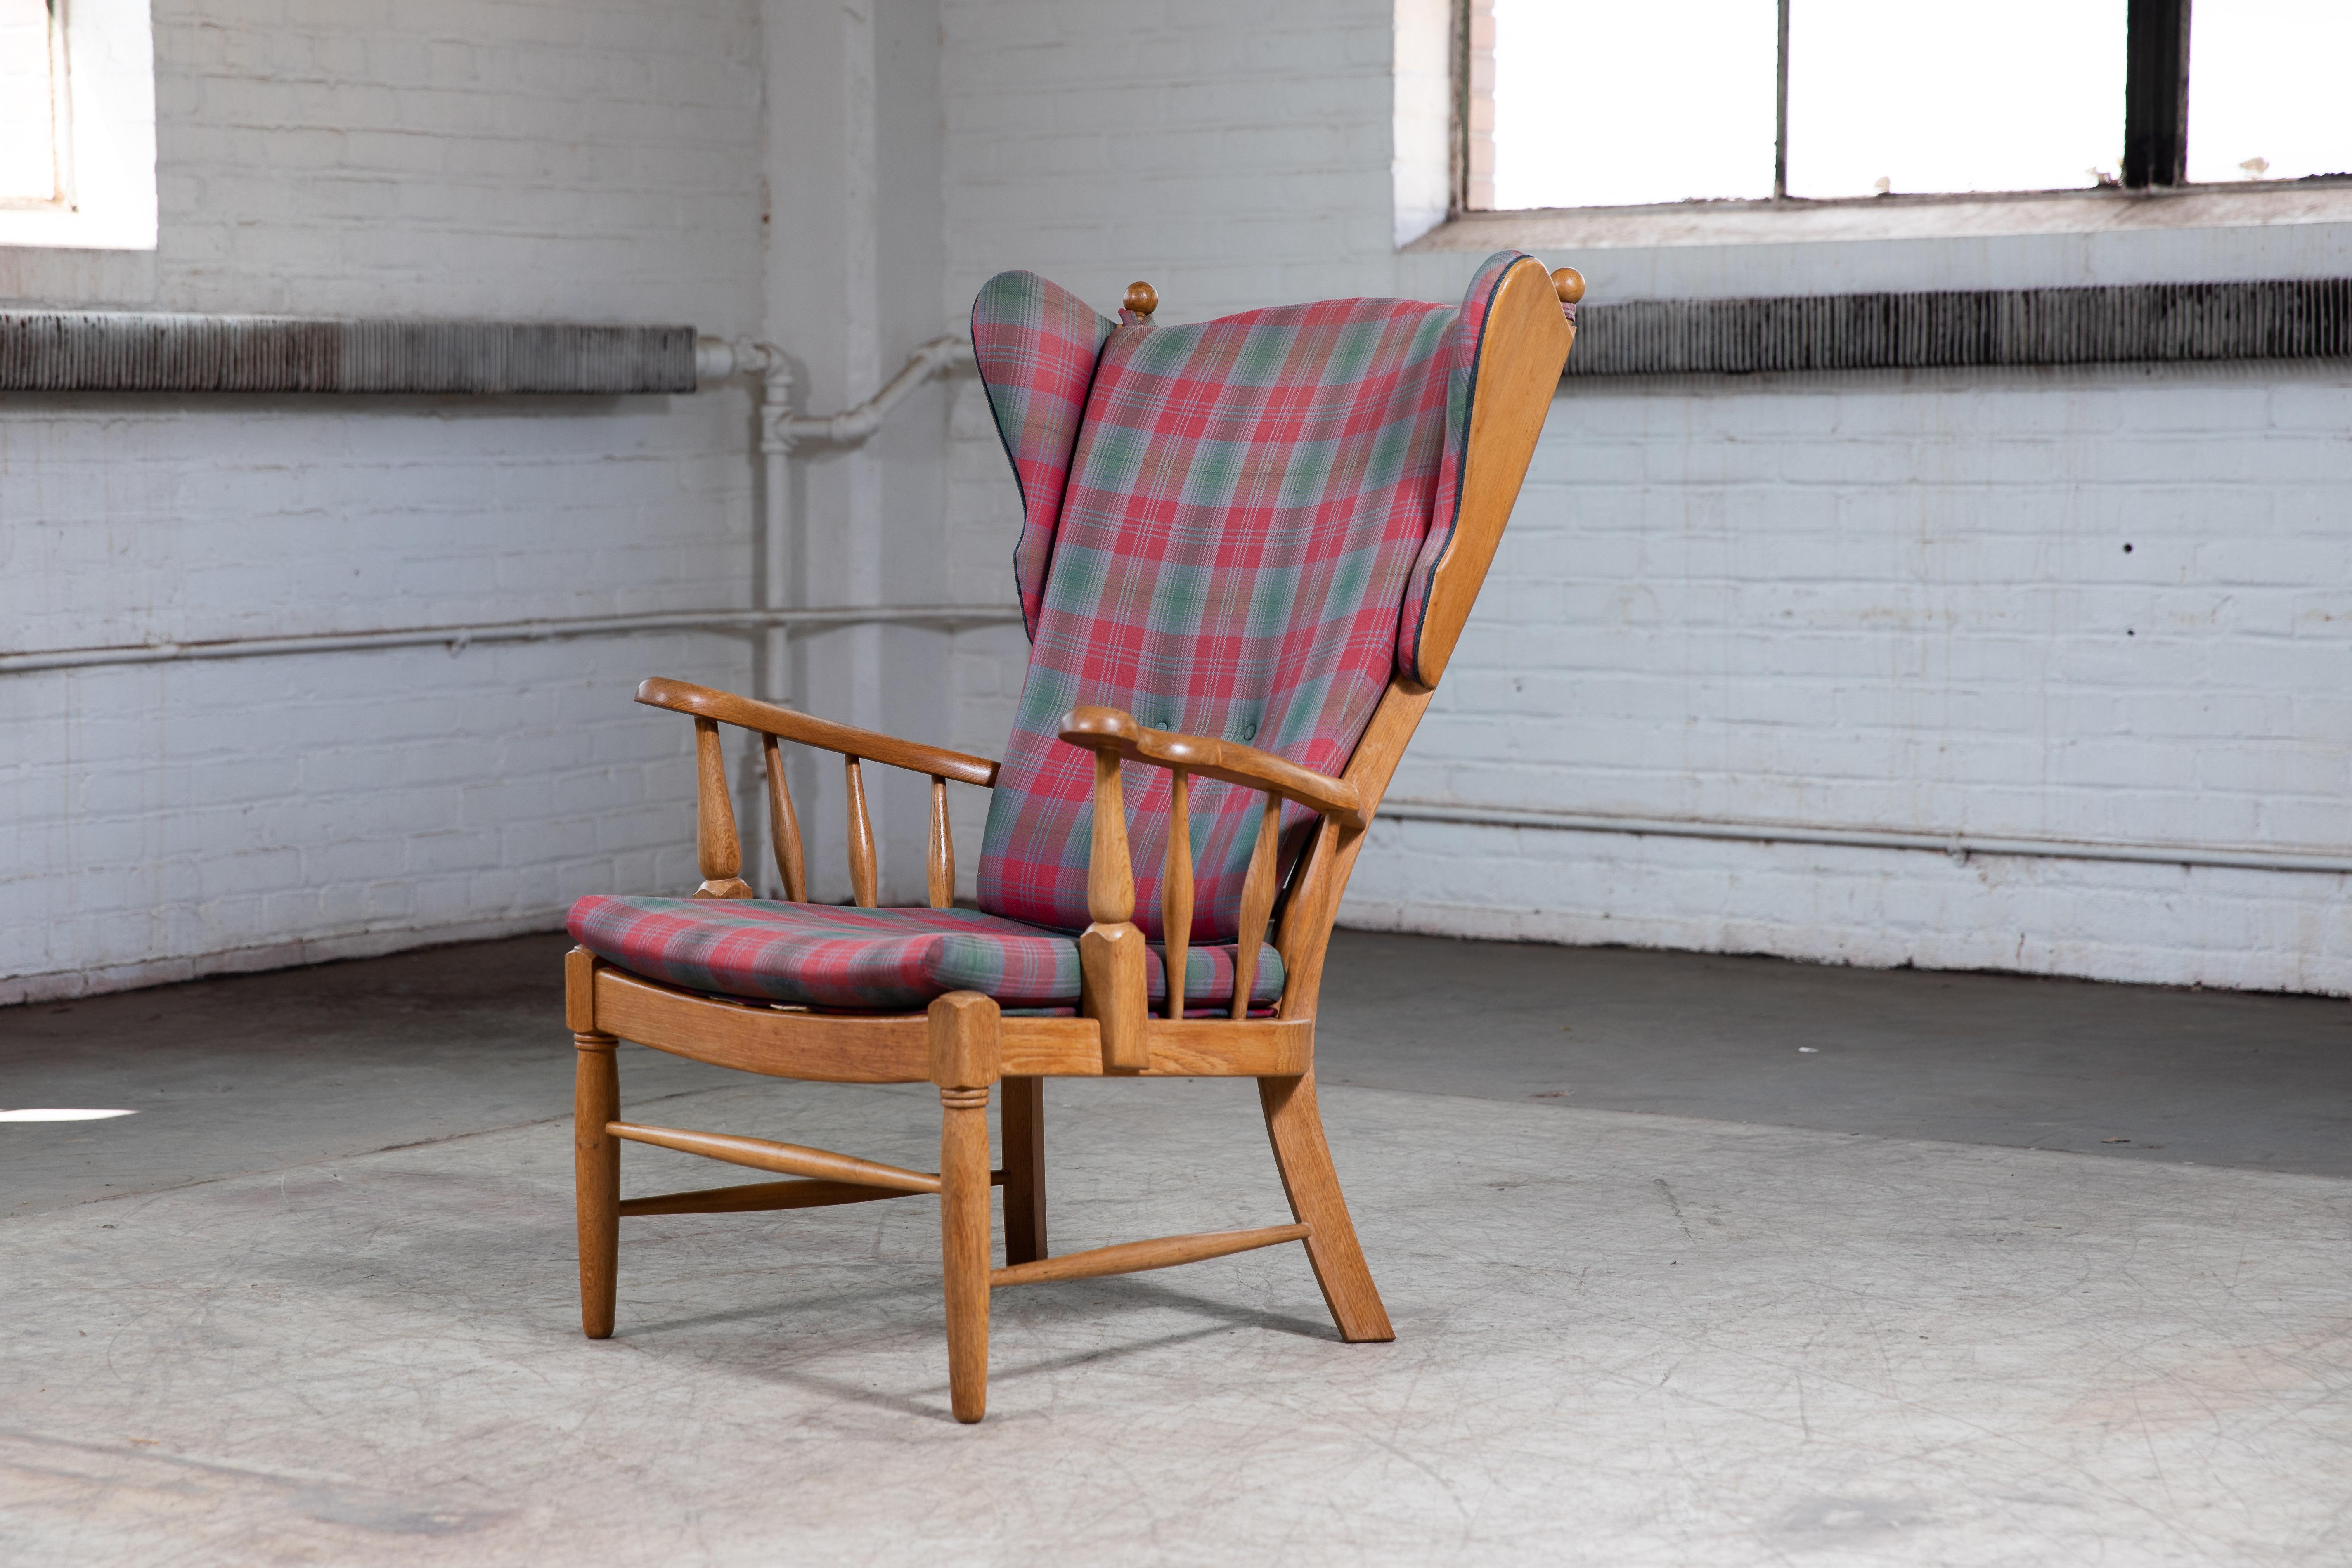 Great example Danish midcentury counbtry-style design, circa 1950s wingback chair in carved solid oak with exposed sides. Sturdy and strong construction of generous proportions making for a very comfortable chair. Fantastic addition to the country